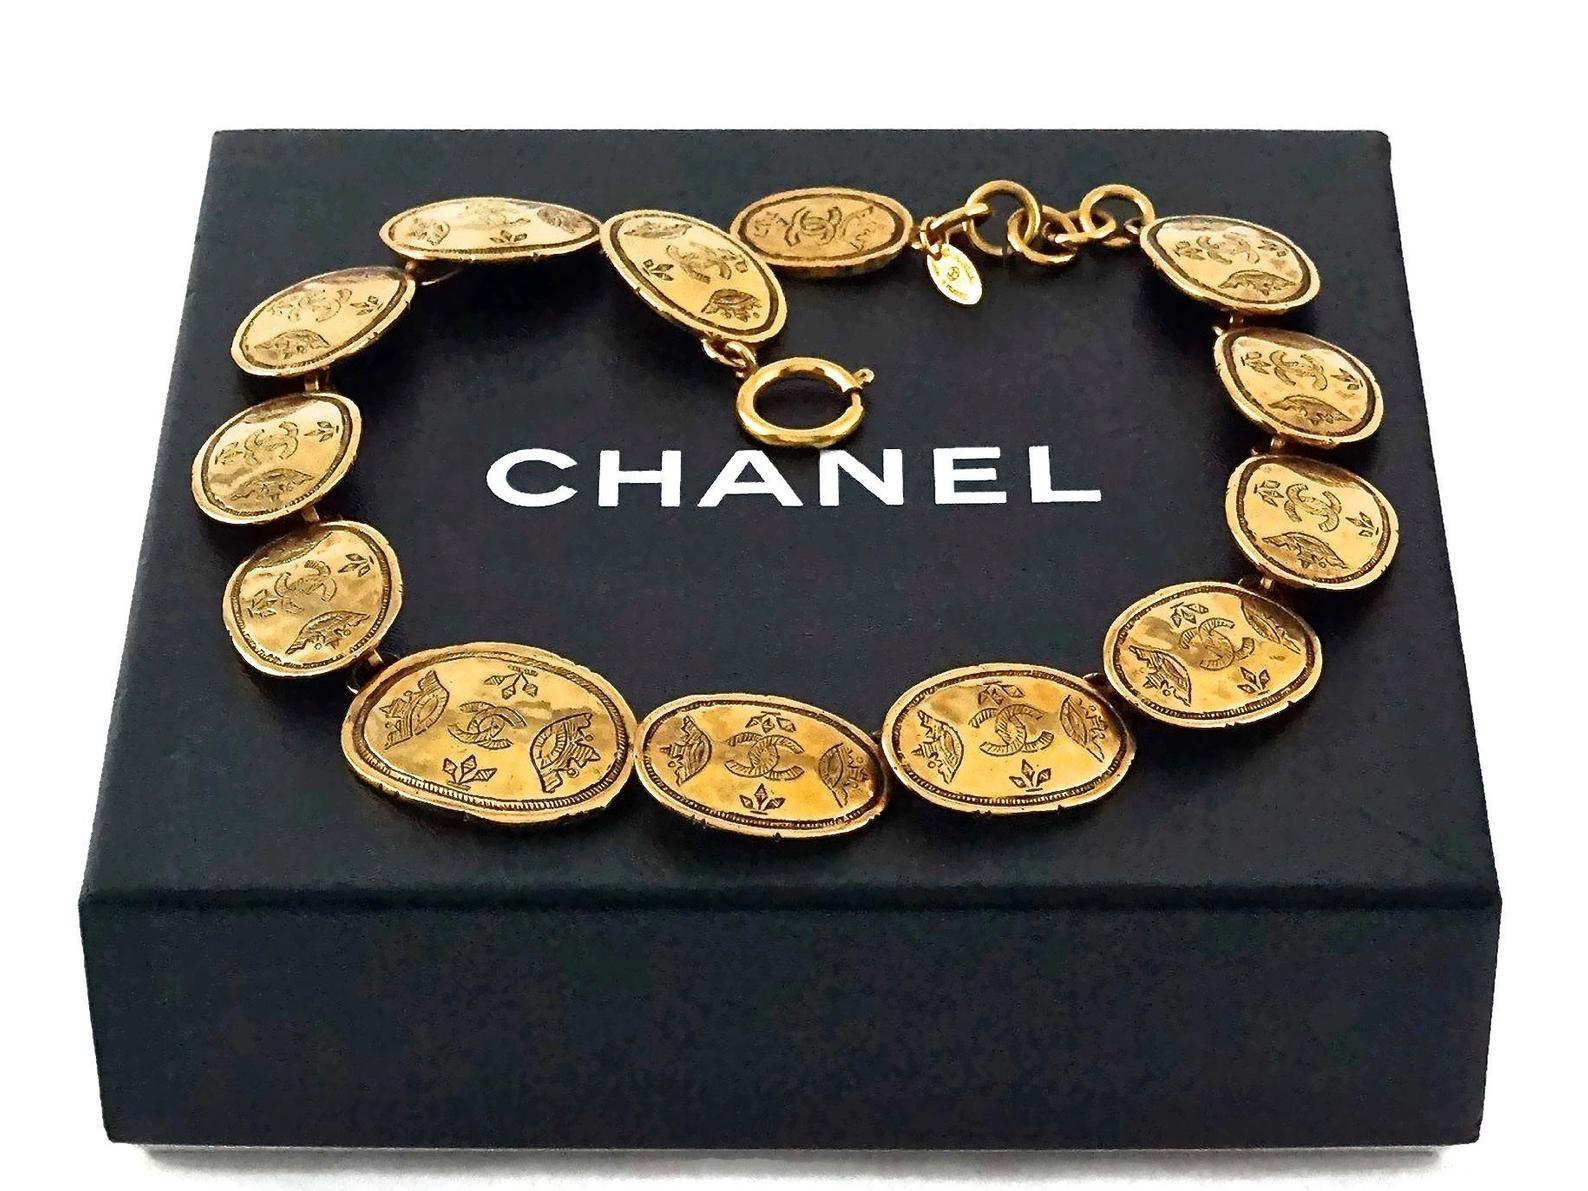 Vintage CHANEL Regal Crown Logo Coin Medallion Choker Necklace

Measurements:
Height: 0.90 inch (2.3 cm)
Wearable Length: 15.74 inches (40 cm) until 16.92 inches (43 cm)

Features:
- 100% Authentic CHANEL.
- Oval coins/ medallions with engraved CC